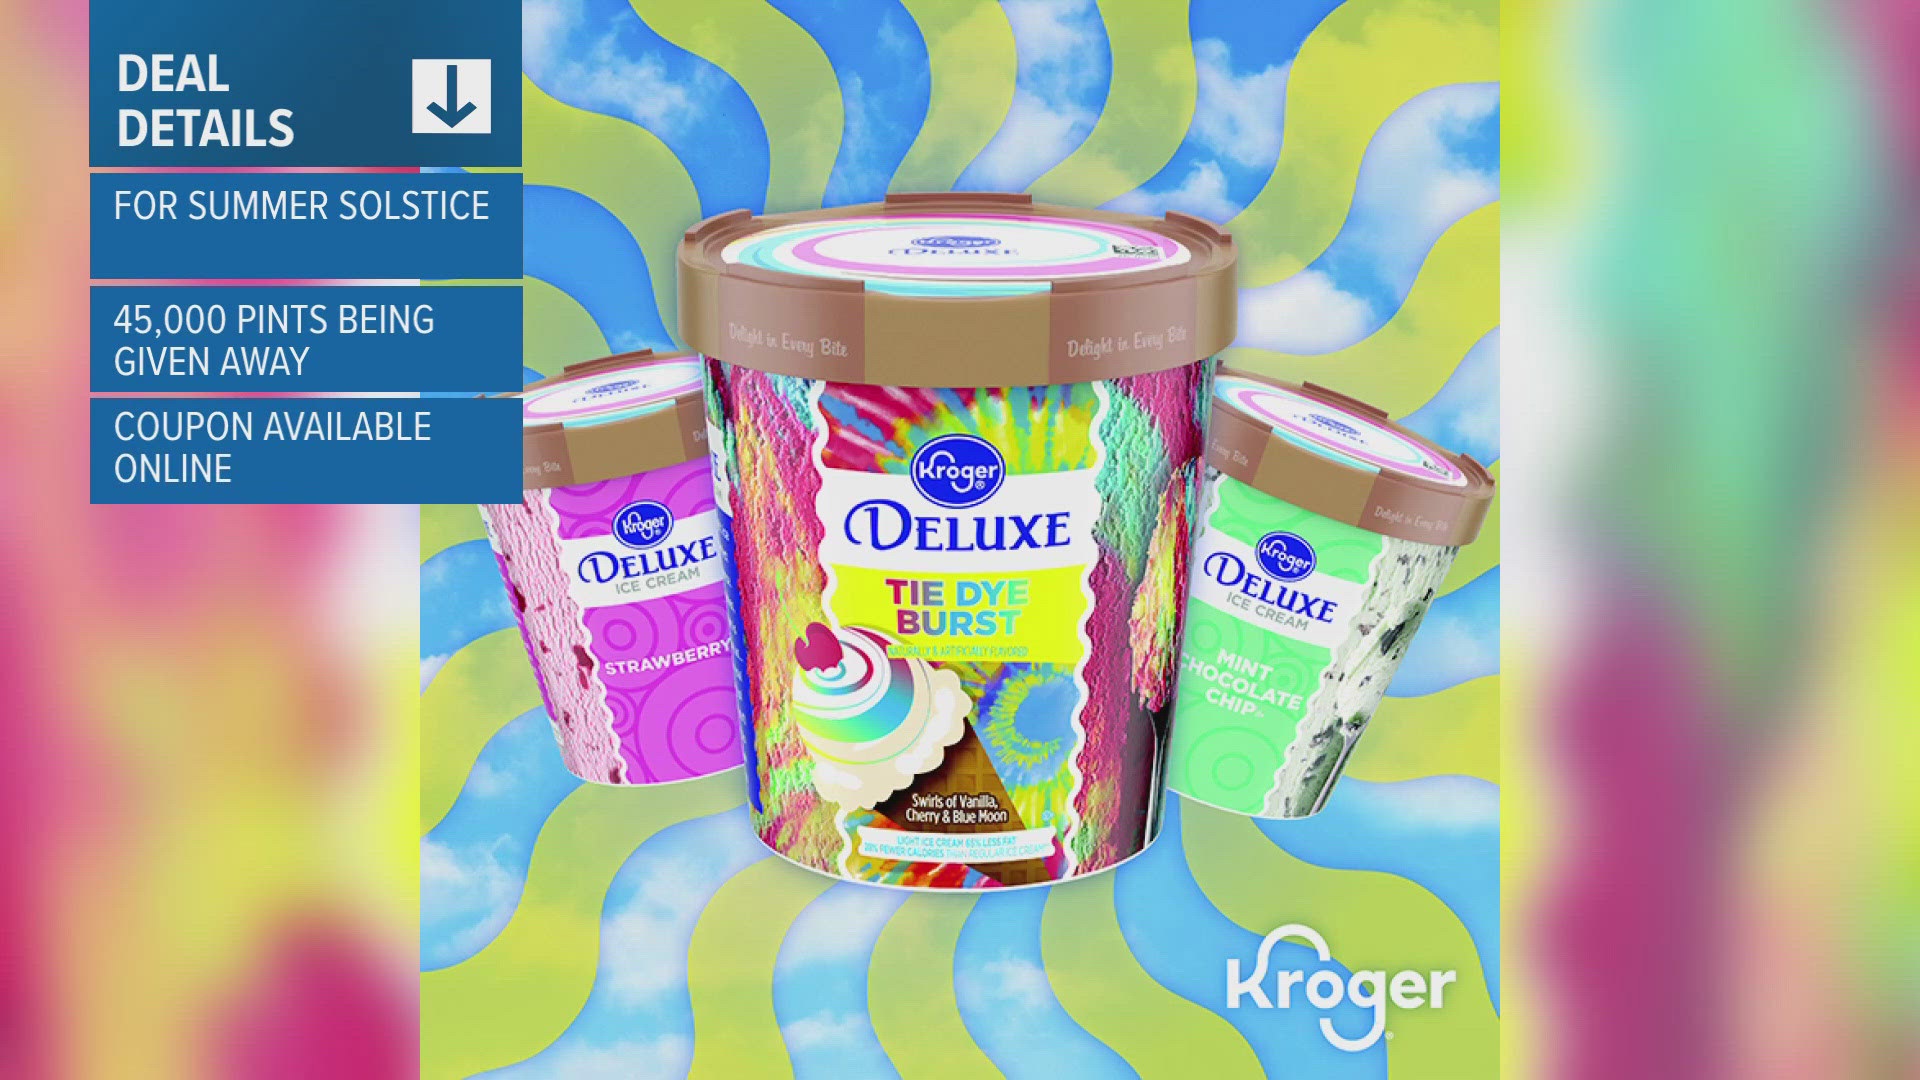 Kroger, Fry's parent company, will be giving away 45,000 pints of ice cream on June 20; 50 for each minute of sunlight.